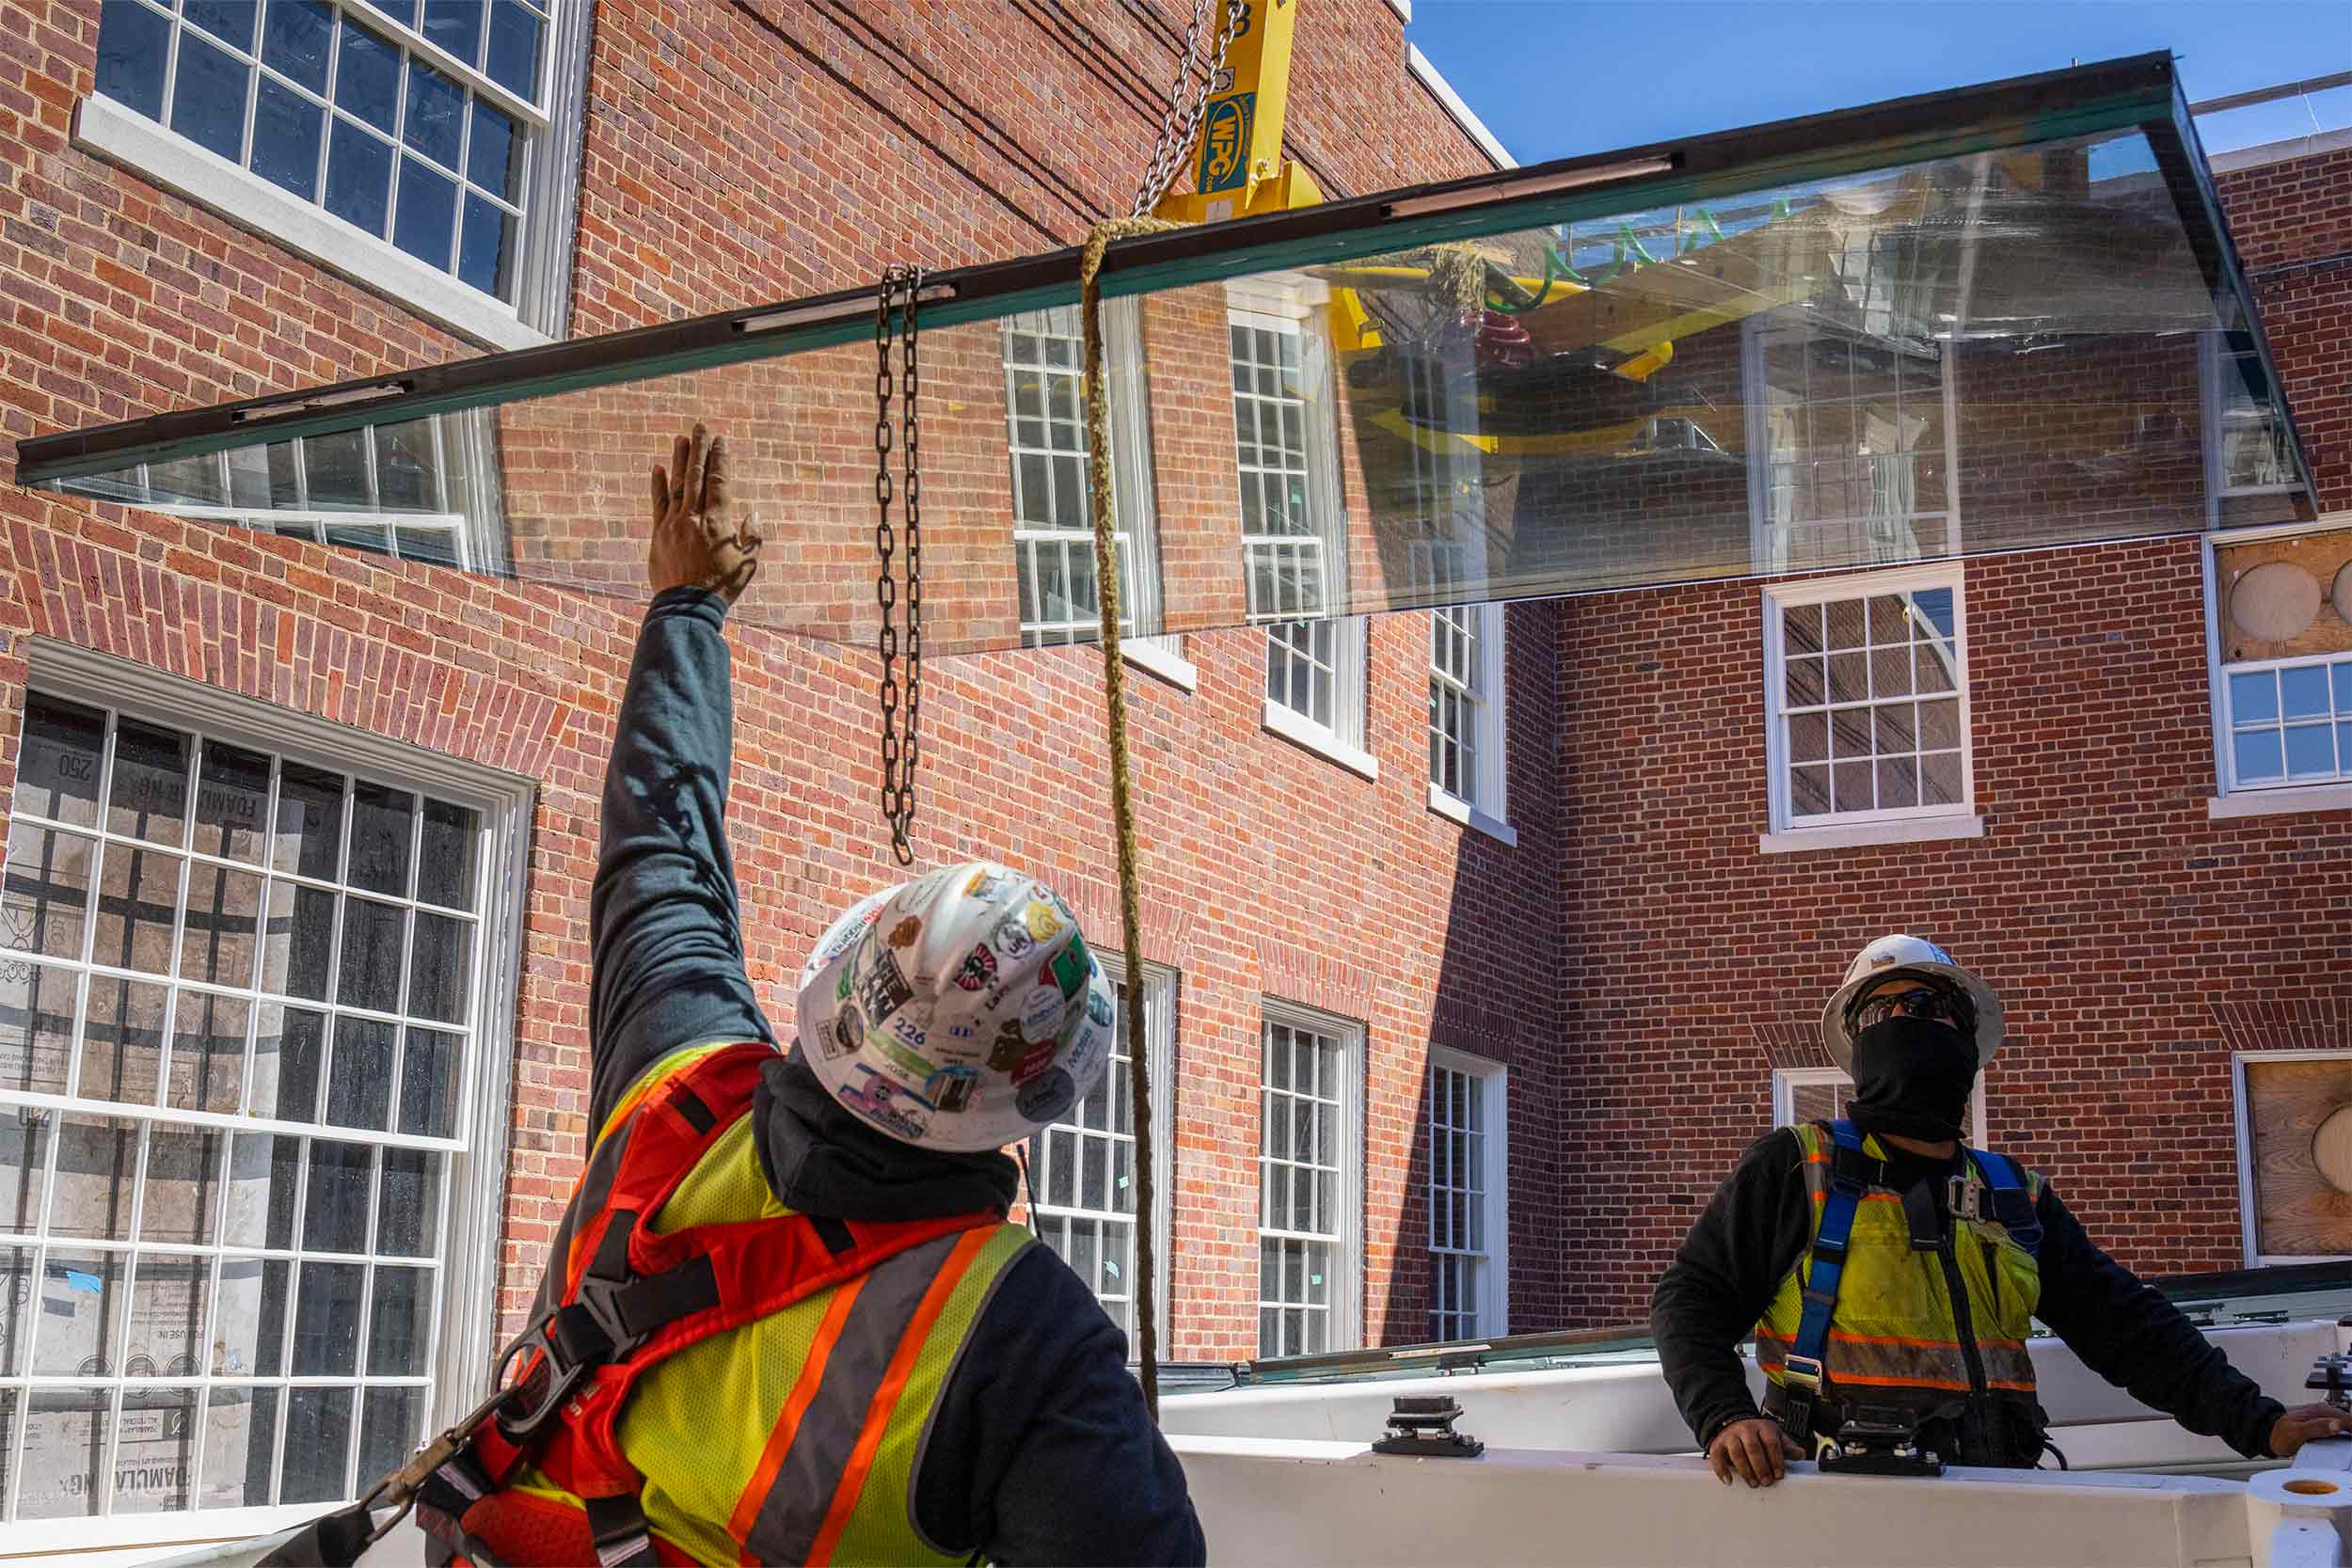 Standing inside the frame, two workers oversee another pane of glass as the crane lowers it